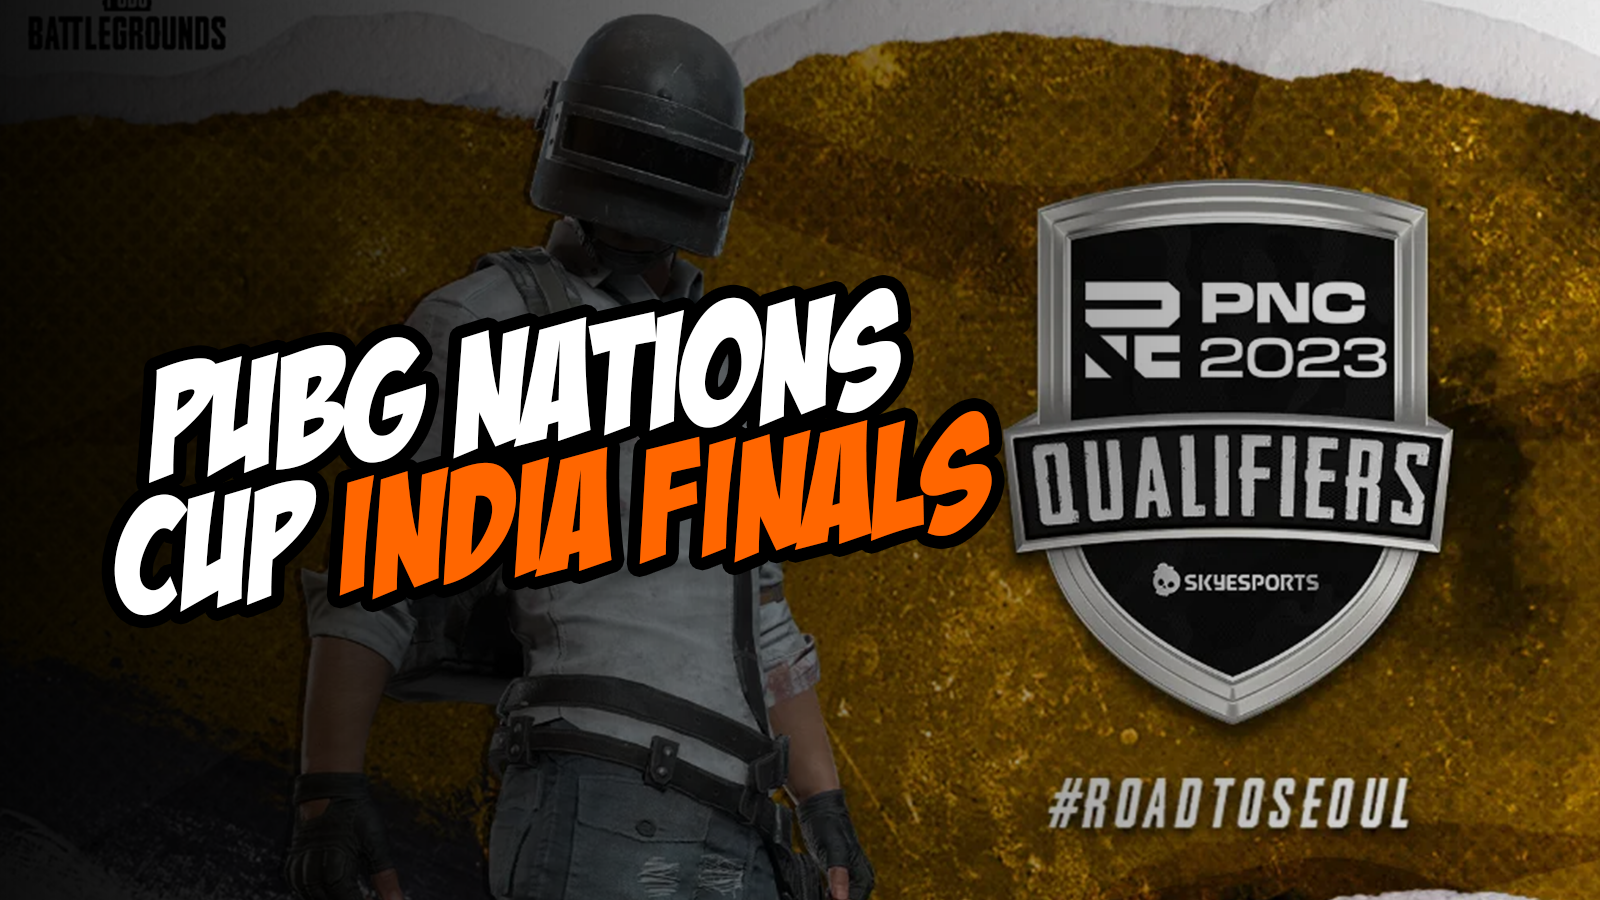 Indian PUBG Nations Cup India Finals: Top Teams Triumphs and Secure Their Spot to Represent India in Seoul 